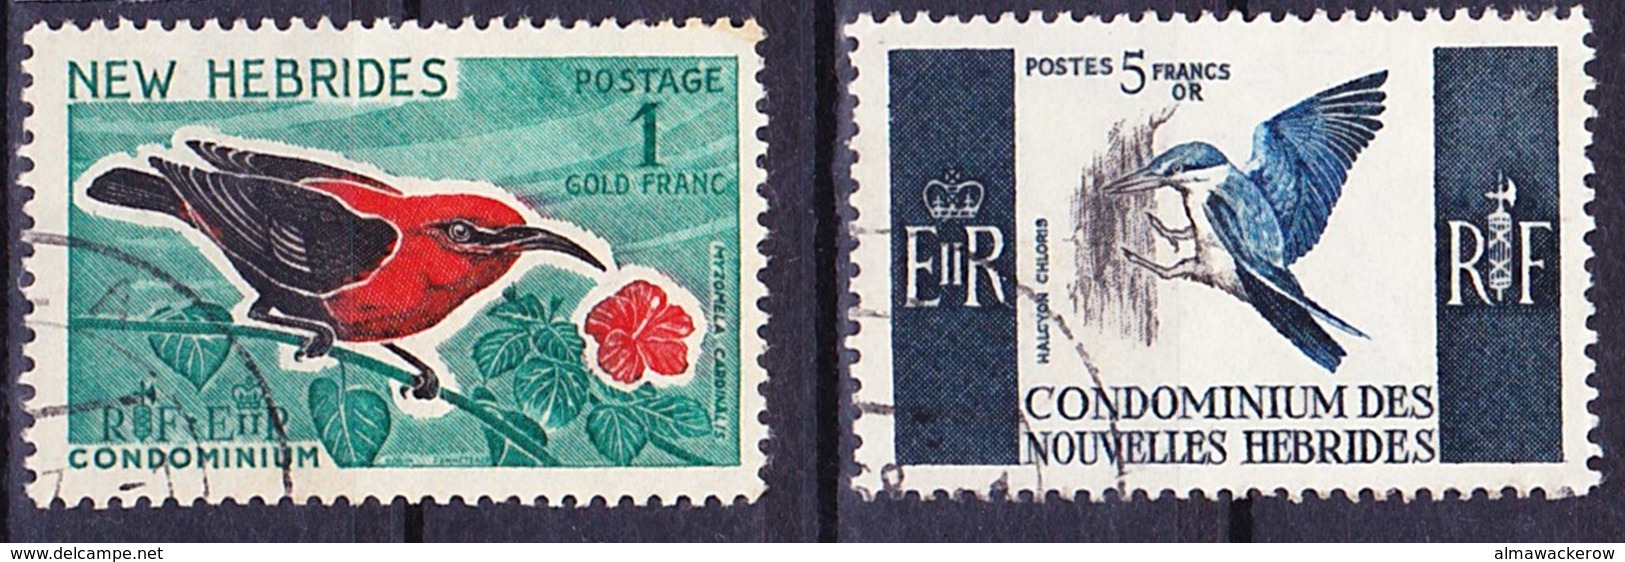 New Hebrides 1966 Bird Definitives Mi 238, 243; Yv 244, 255 Used O, I Sell My Collection! - Usati